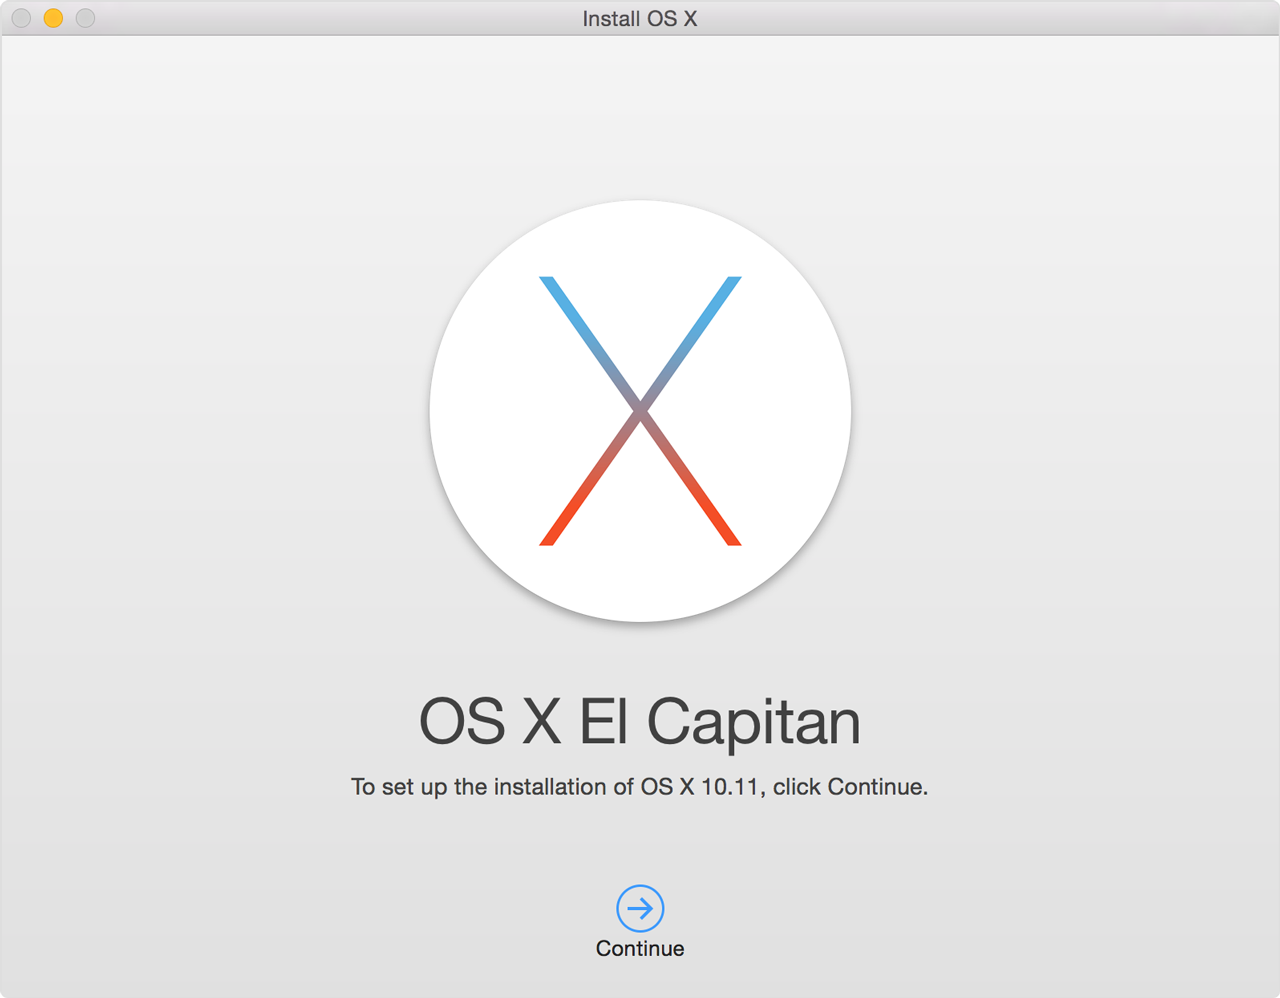 is there an appleworks download for osx el capitan